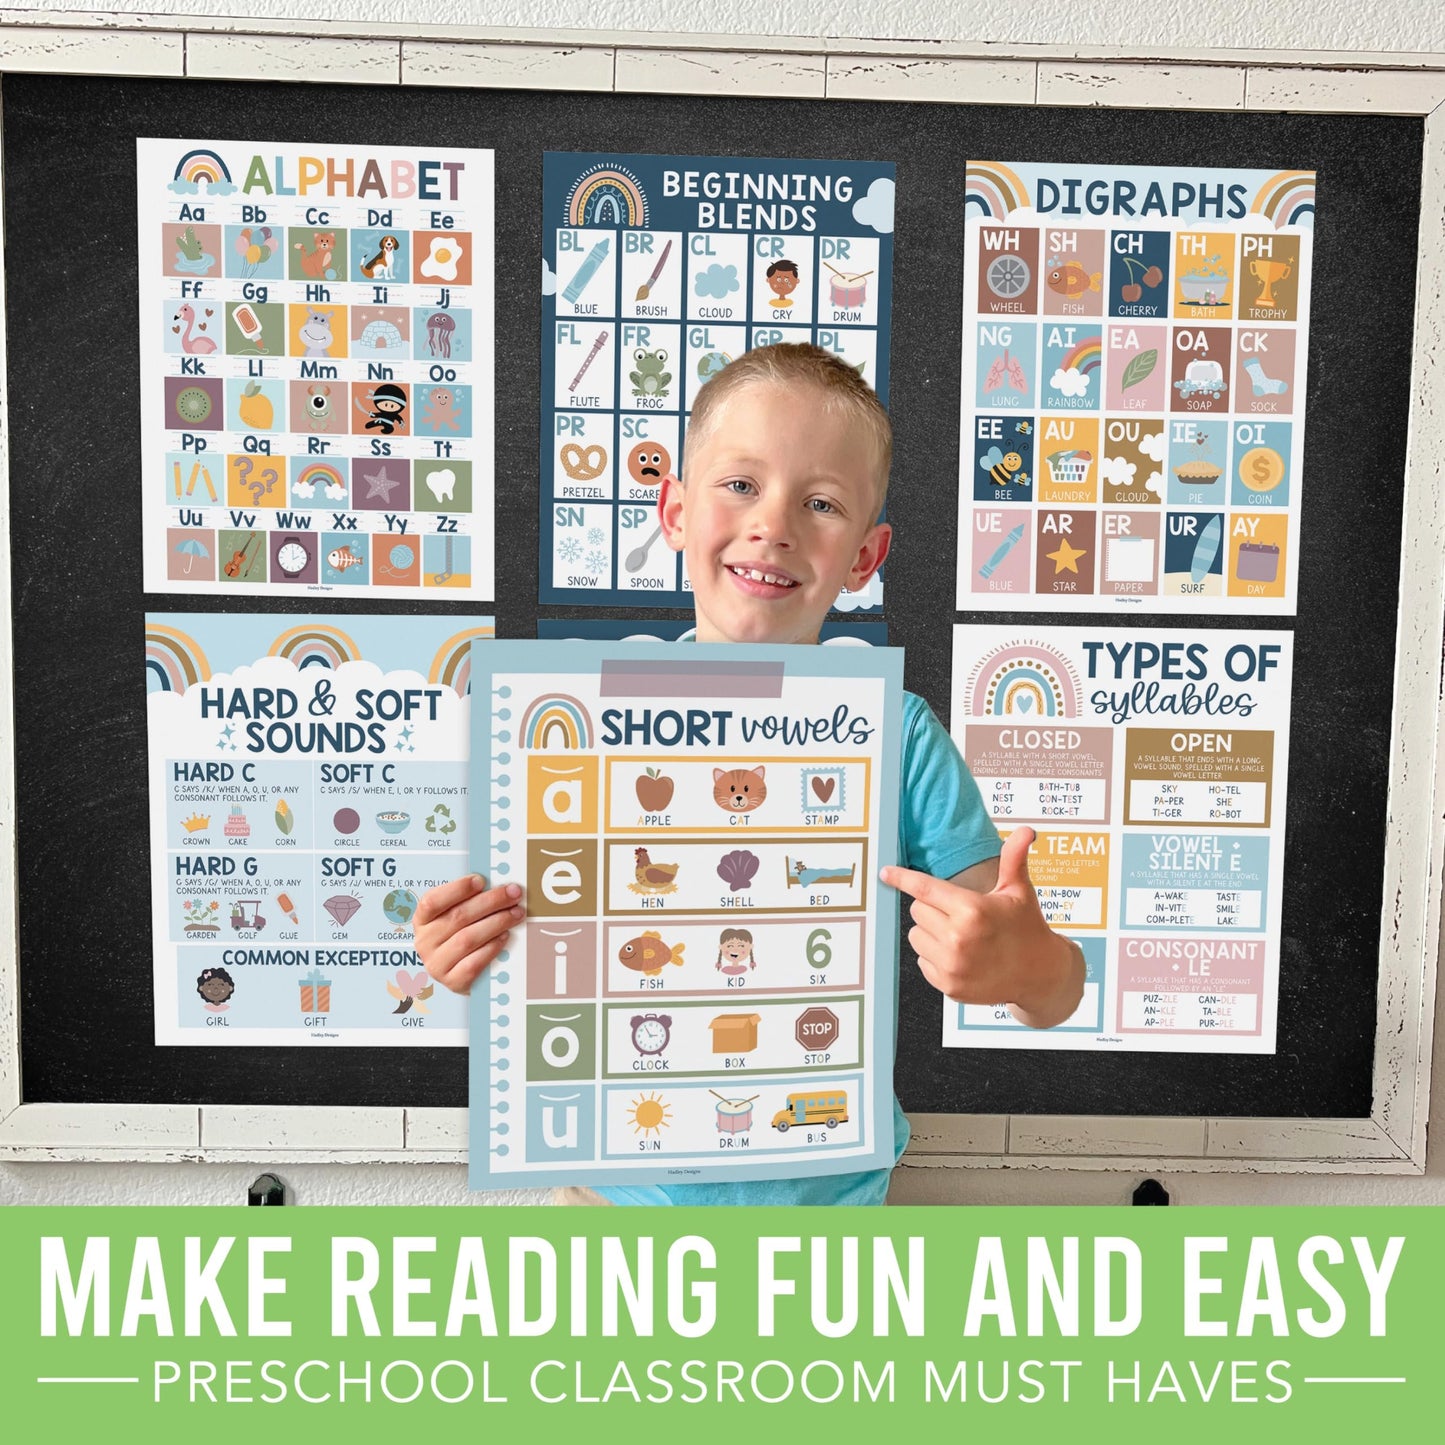 9 Boho Sound Wall Classroom Phonics Posters For Classroom Wall - Sound Wall Phonics Chart 1st Grade, Sound Wall Chart, 6 Syllable Types Posters For Classroom, Consonant Blends And Digraphs Posters